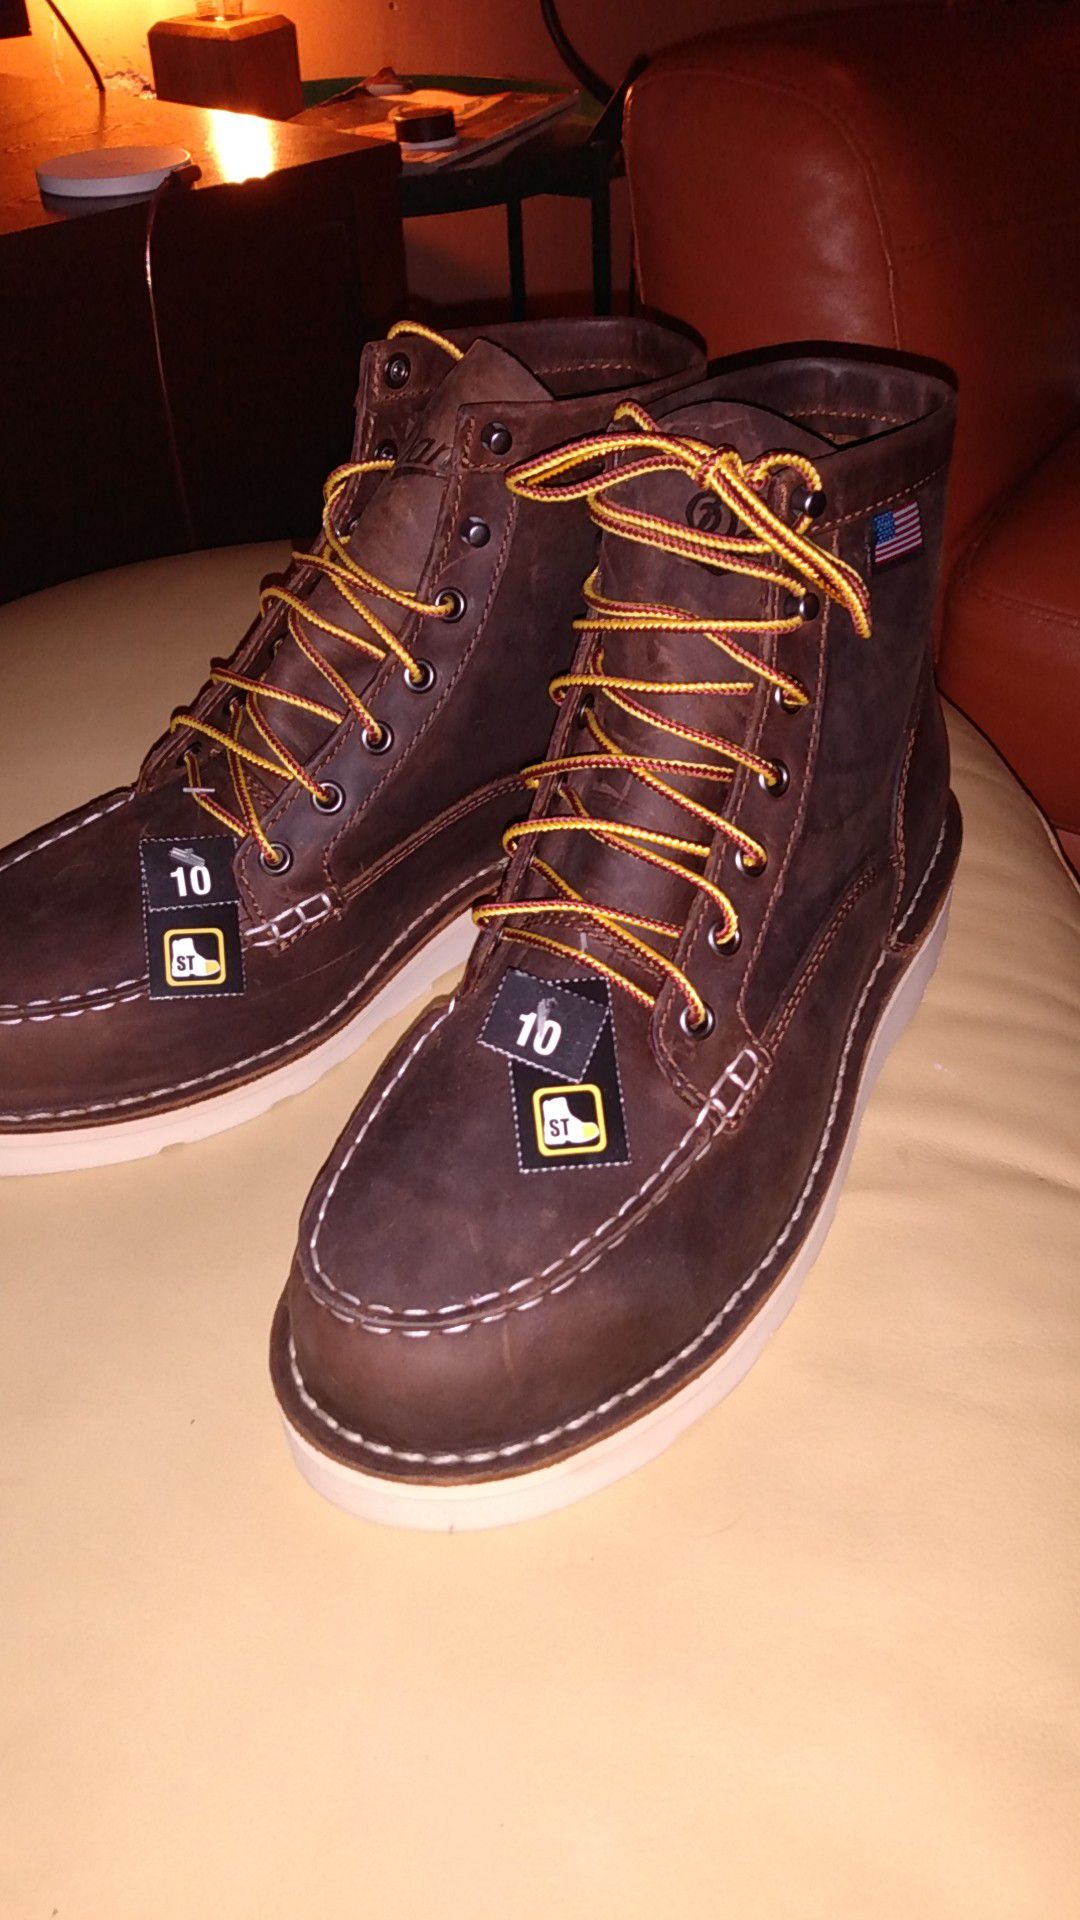 Danner - Work Boots (Steel Toe) leather, size 10